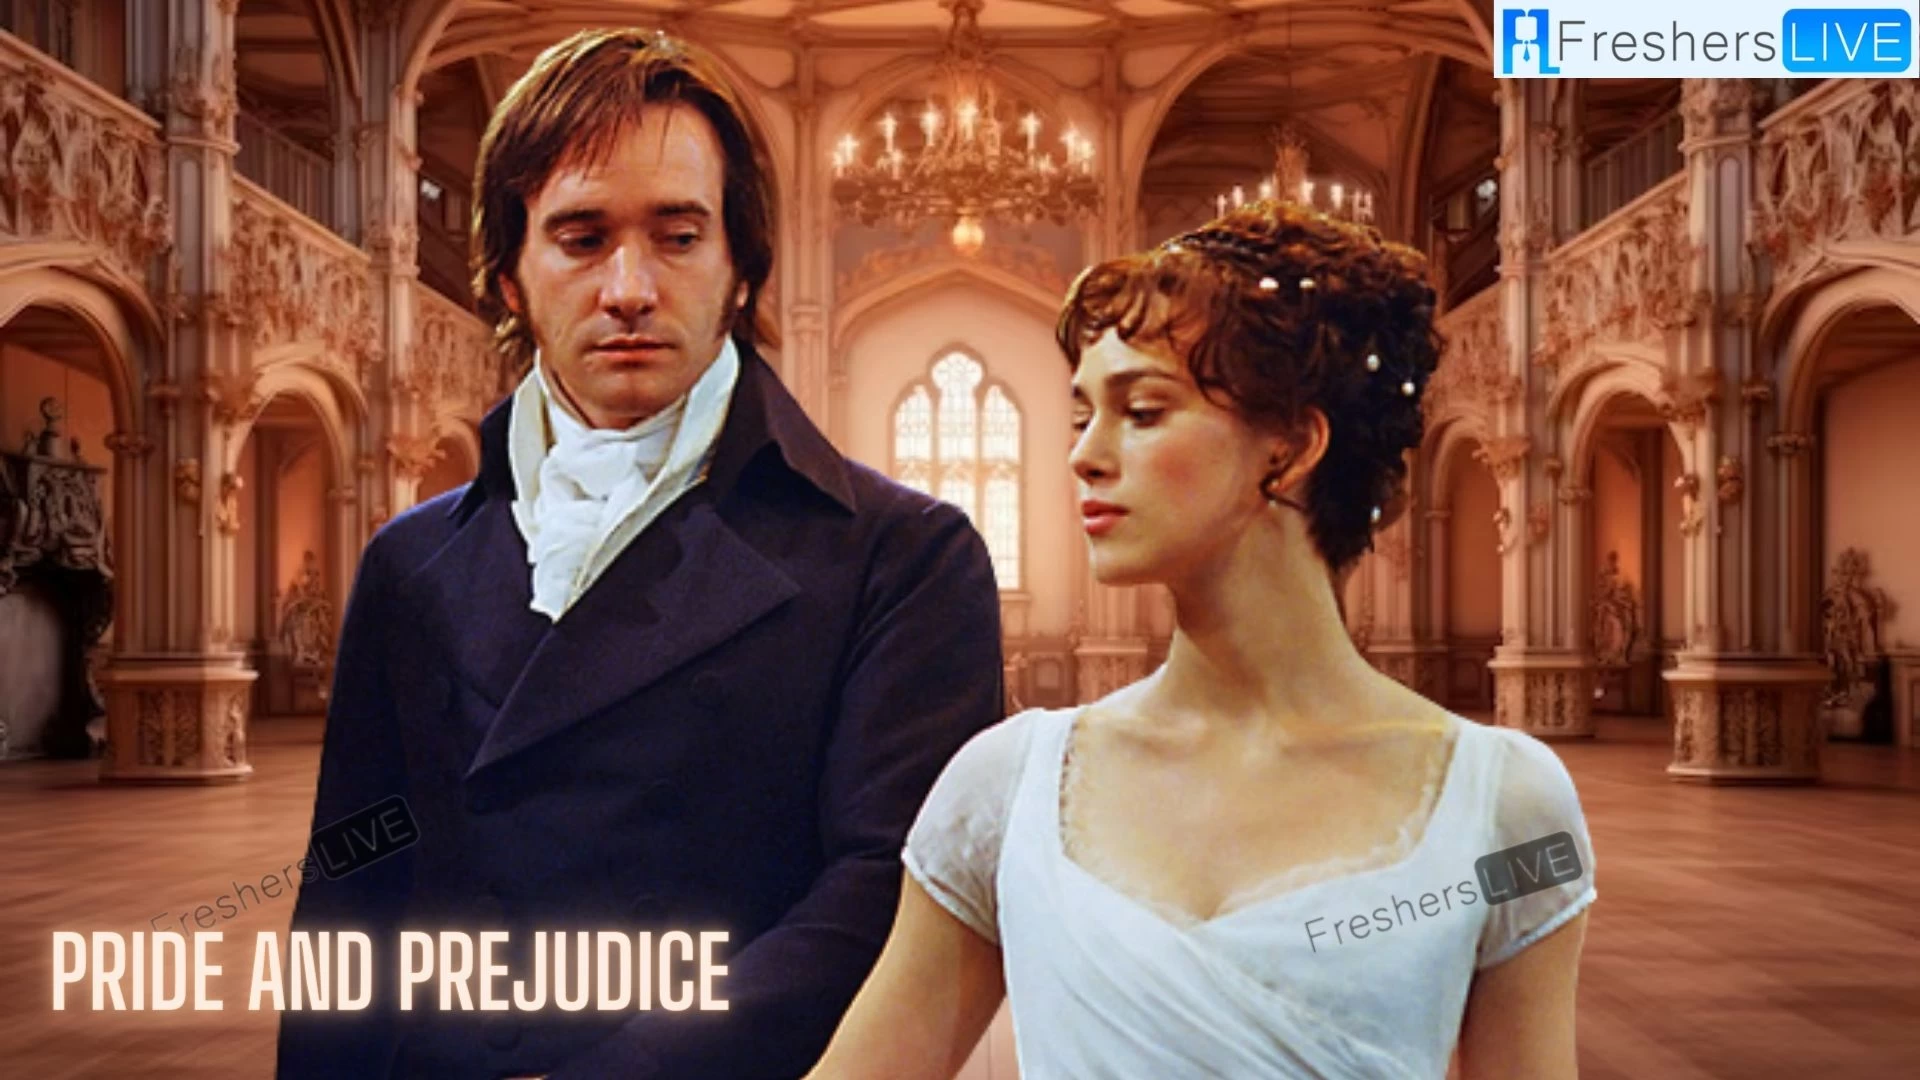 Is Pride and Prejudice Leaving Netflix? When is Pride and Prejudice Leaving Netflix?